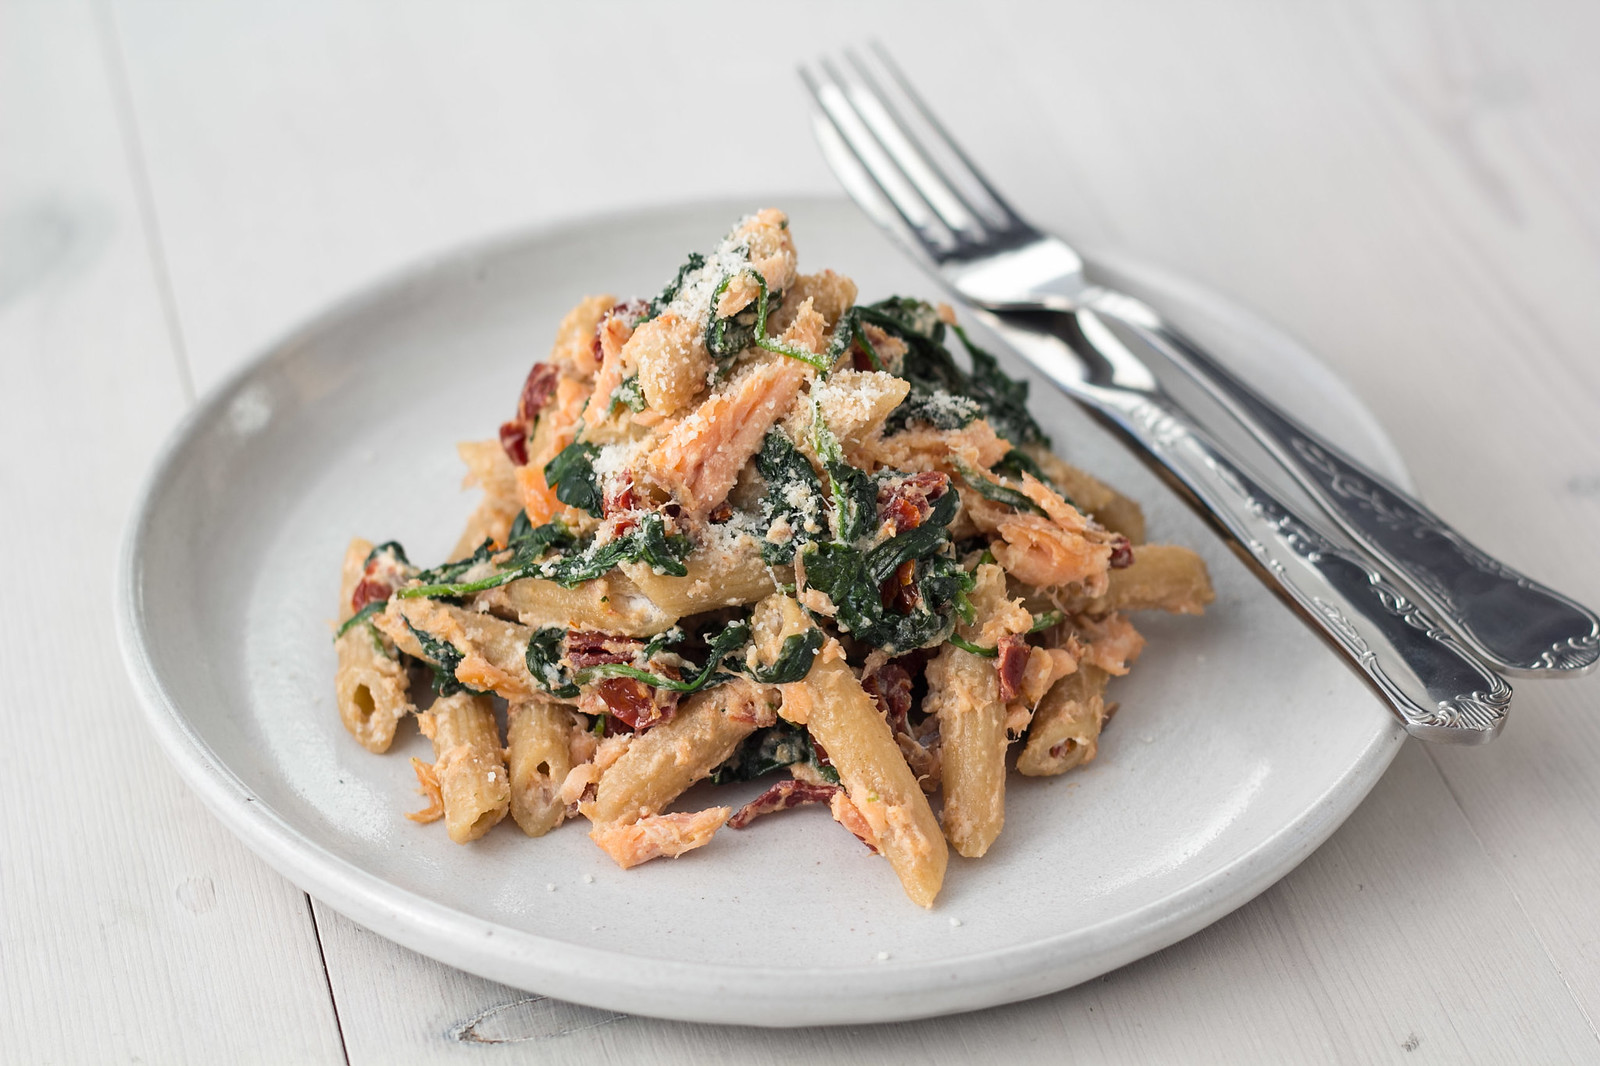 Recipe for Salmon, Spinach and Ricotta Cheese Pasta